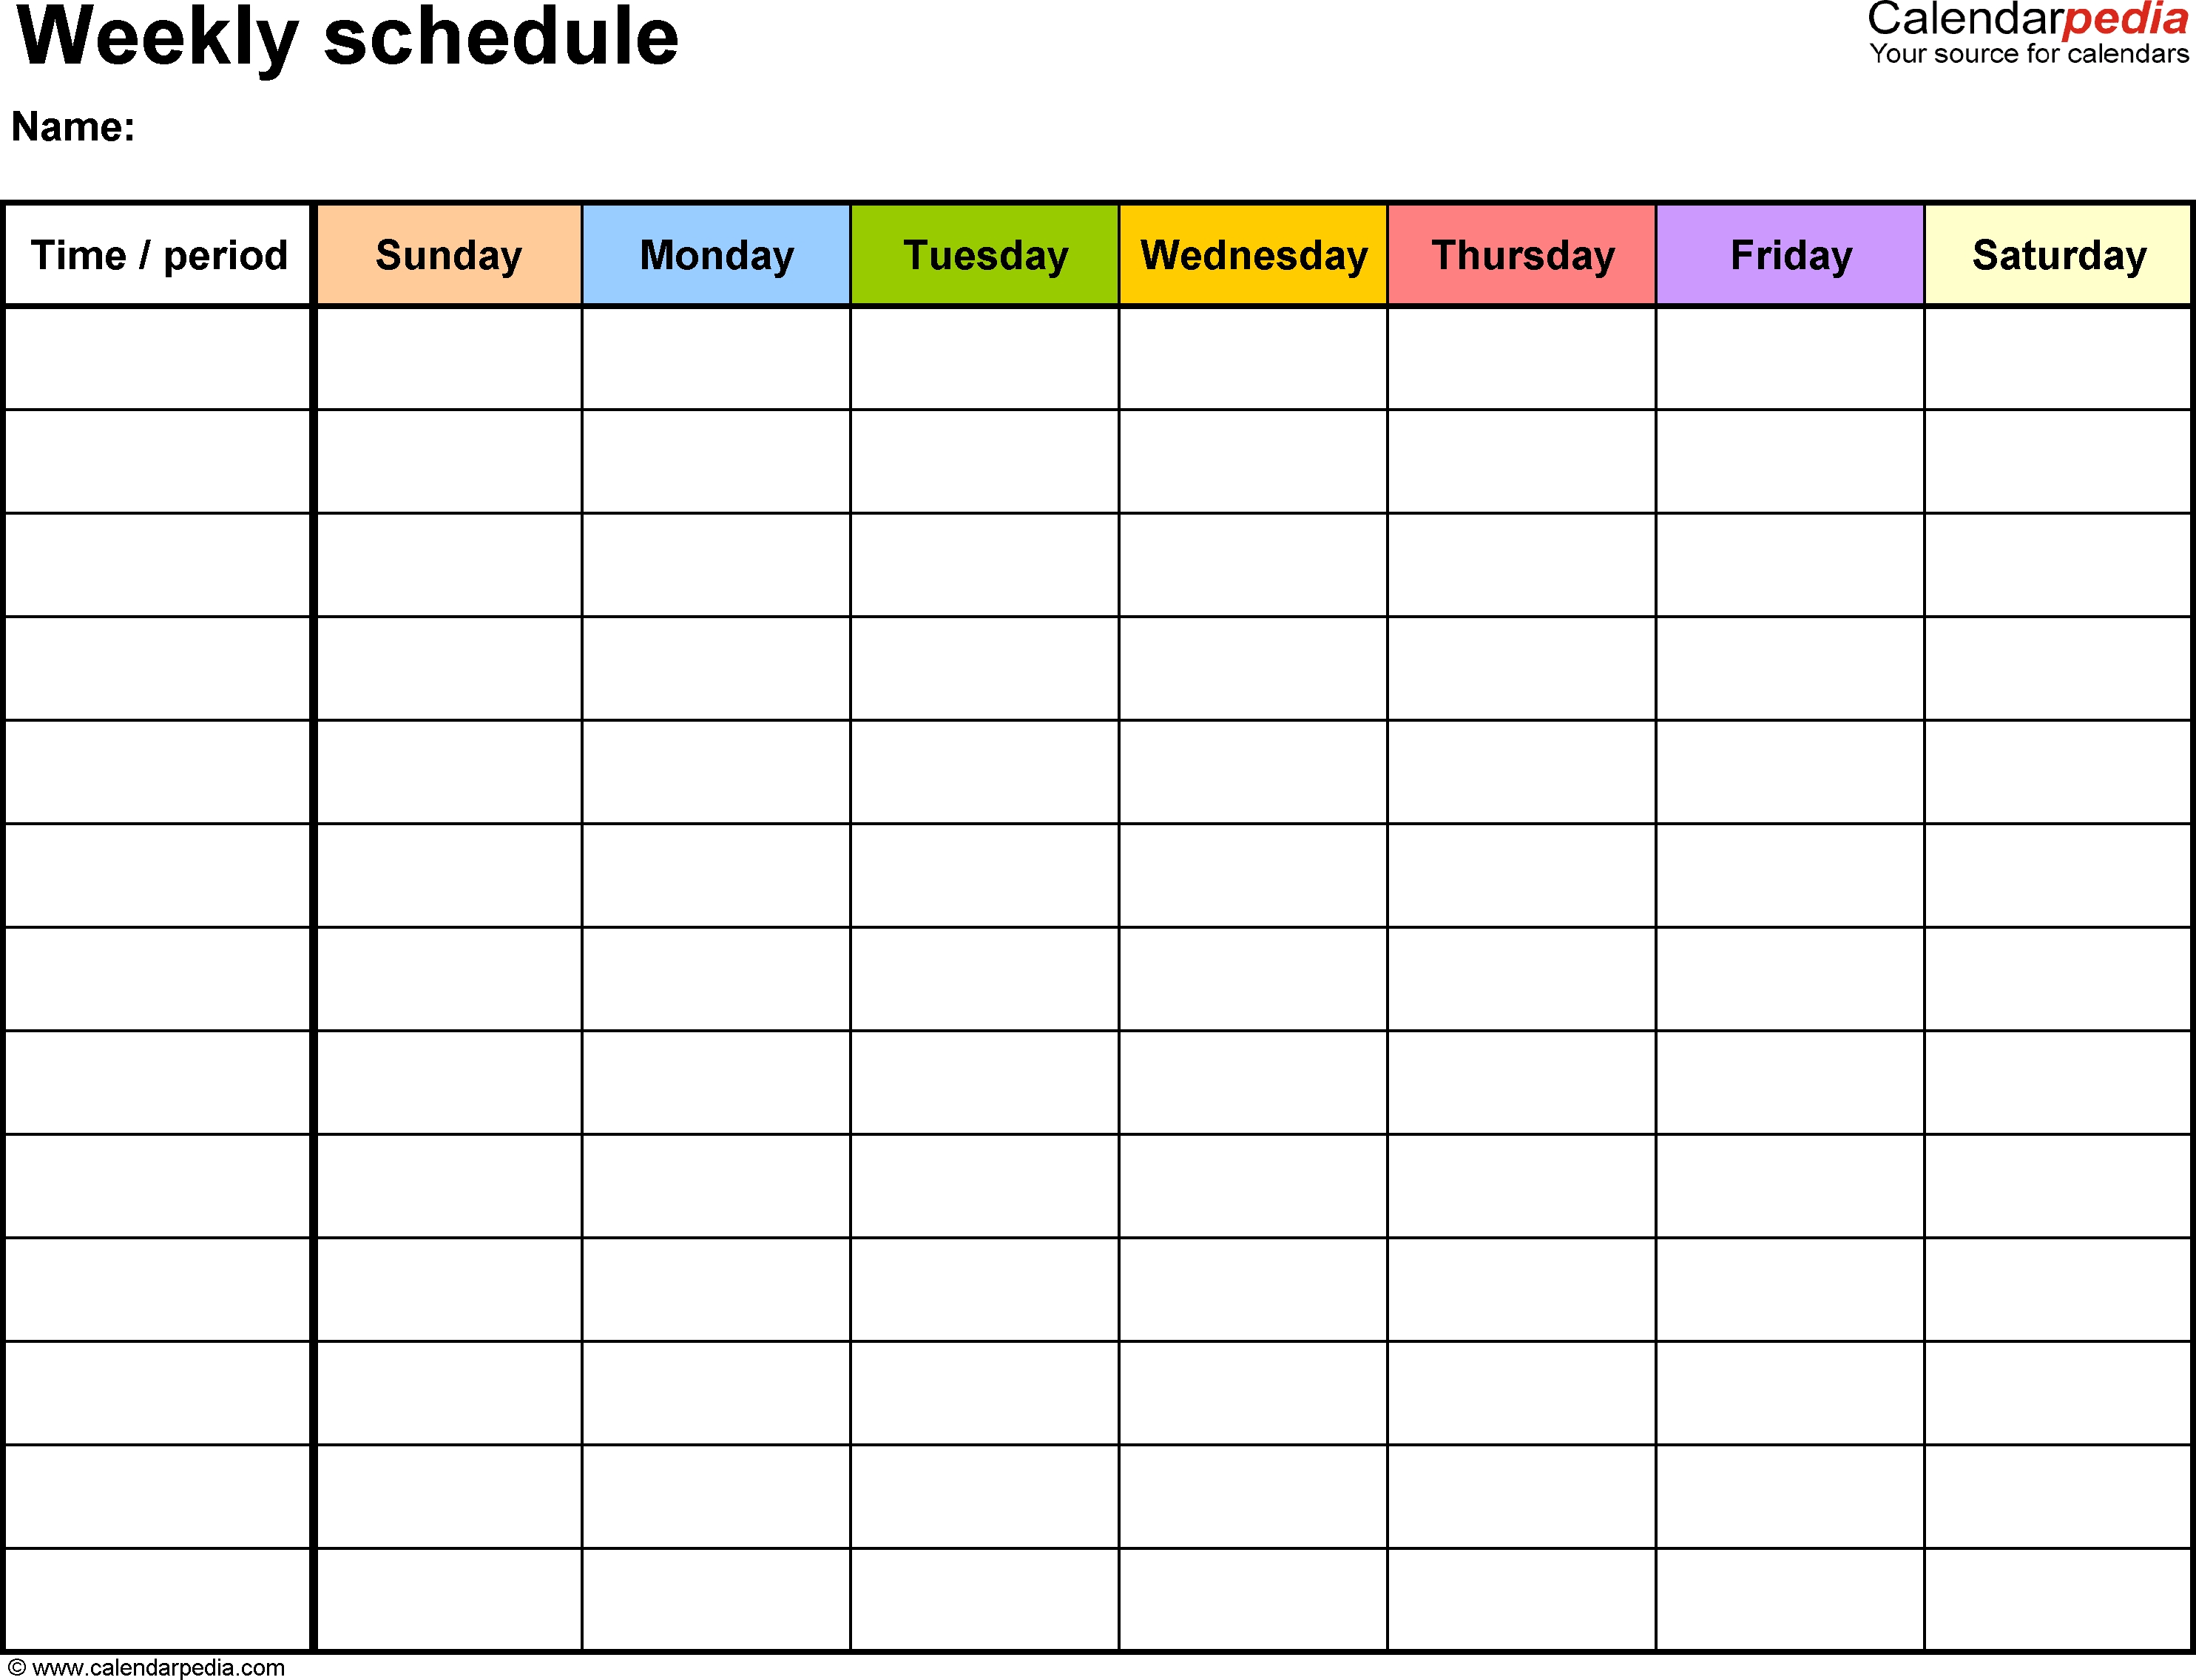 Free Weekly Schedule Templates For Word - 18 Templates  Calendar Monday Through Friday Schedule